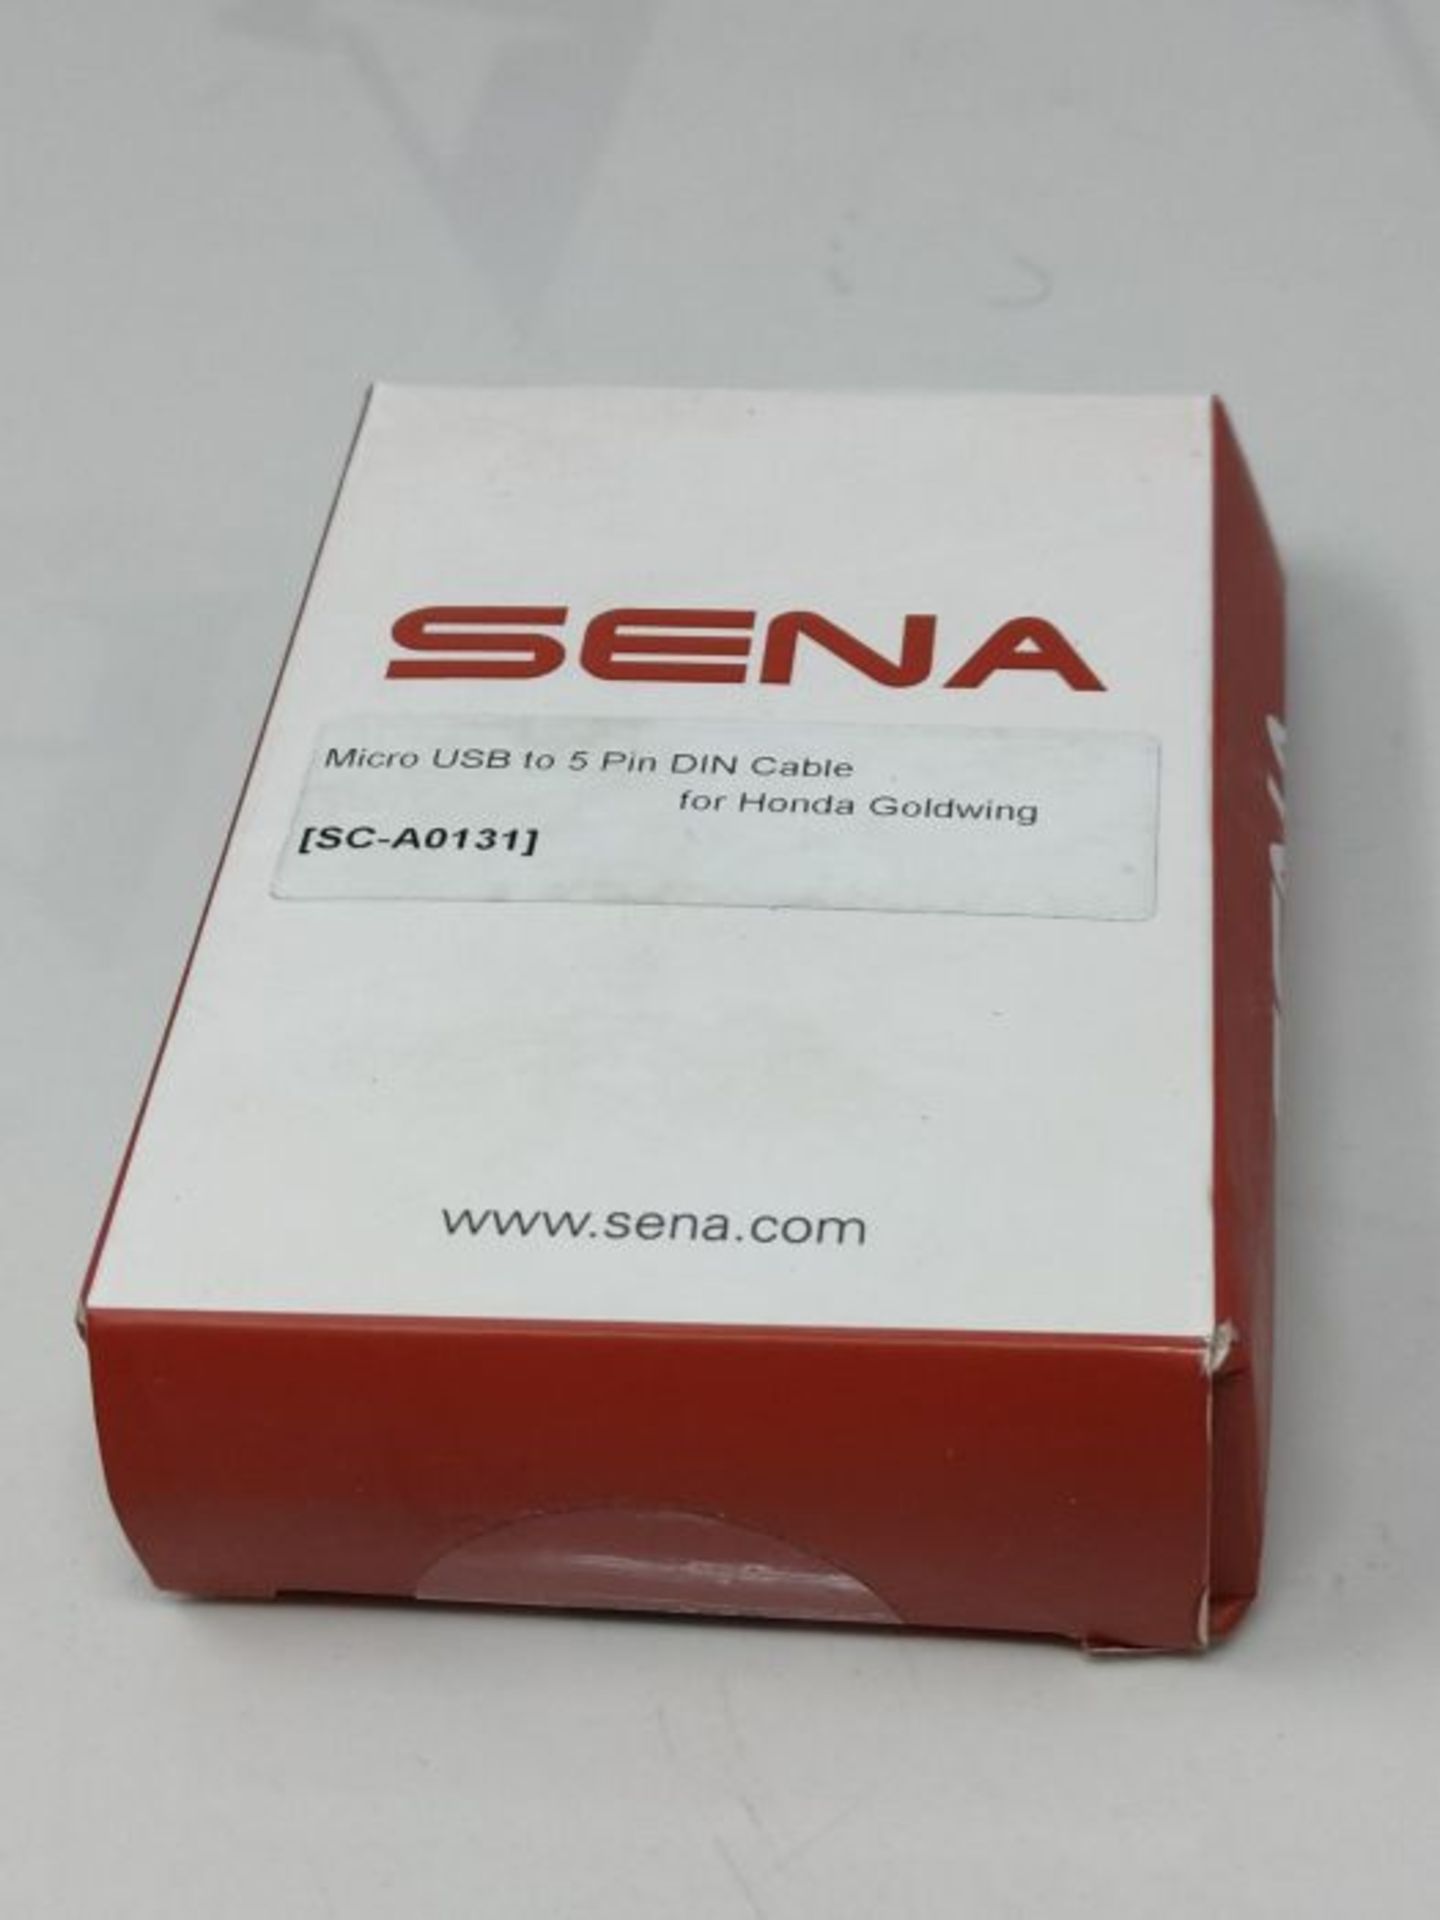 Sena Micro USB to 5 Pin DIN Cable for Honda Goldwing - Image 2 of 3